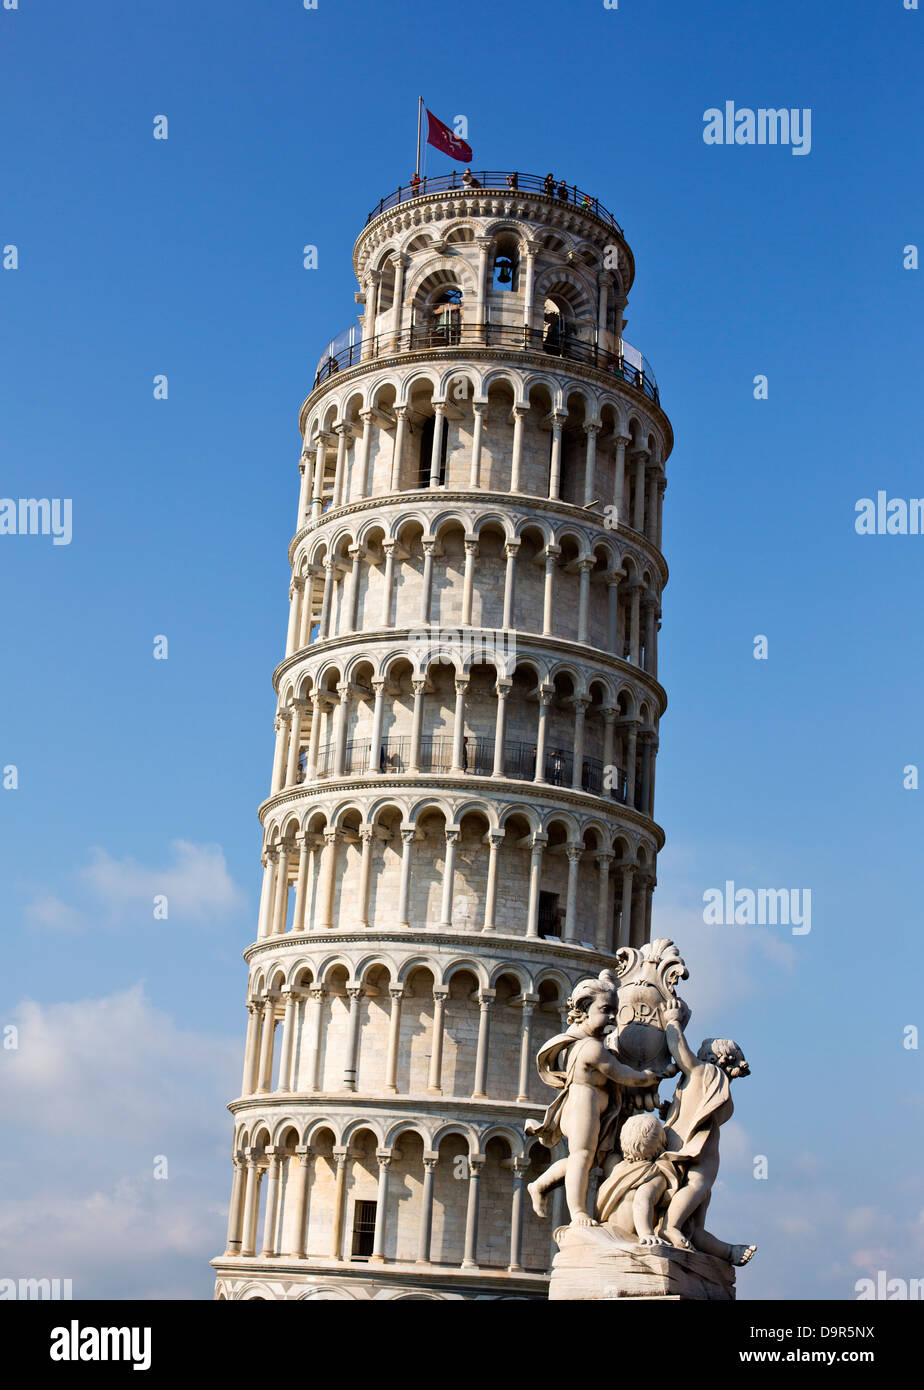 Statue in front of a tower, La Fontana dei Putti Statue, Leaning Tower of Pisa, Piazza dei Miracoli, Pisa, Tuscany, Italy Stock Photo